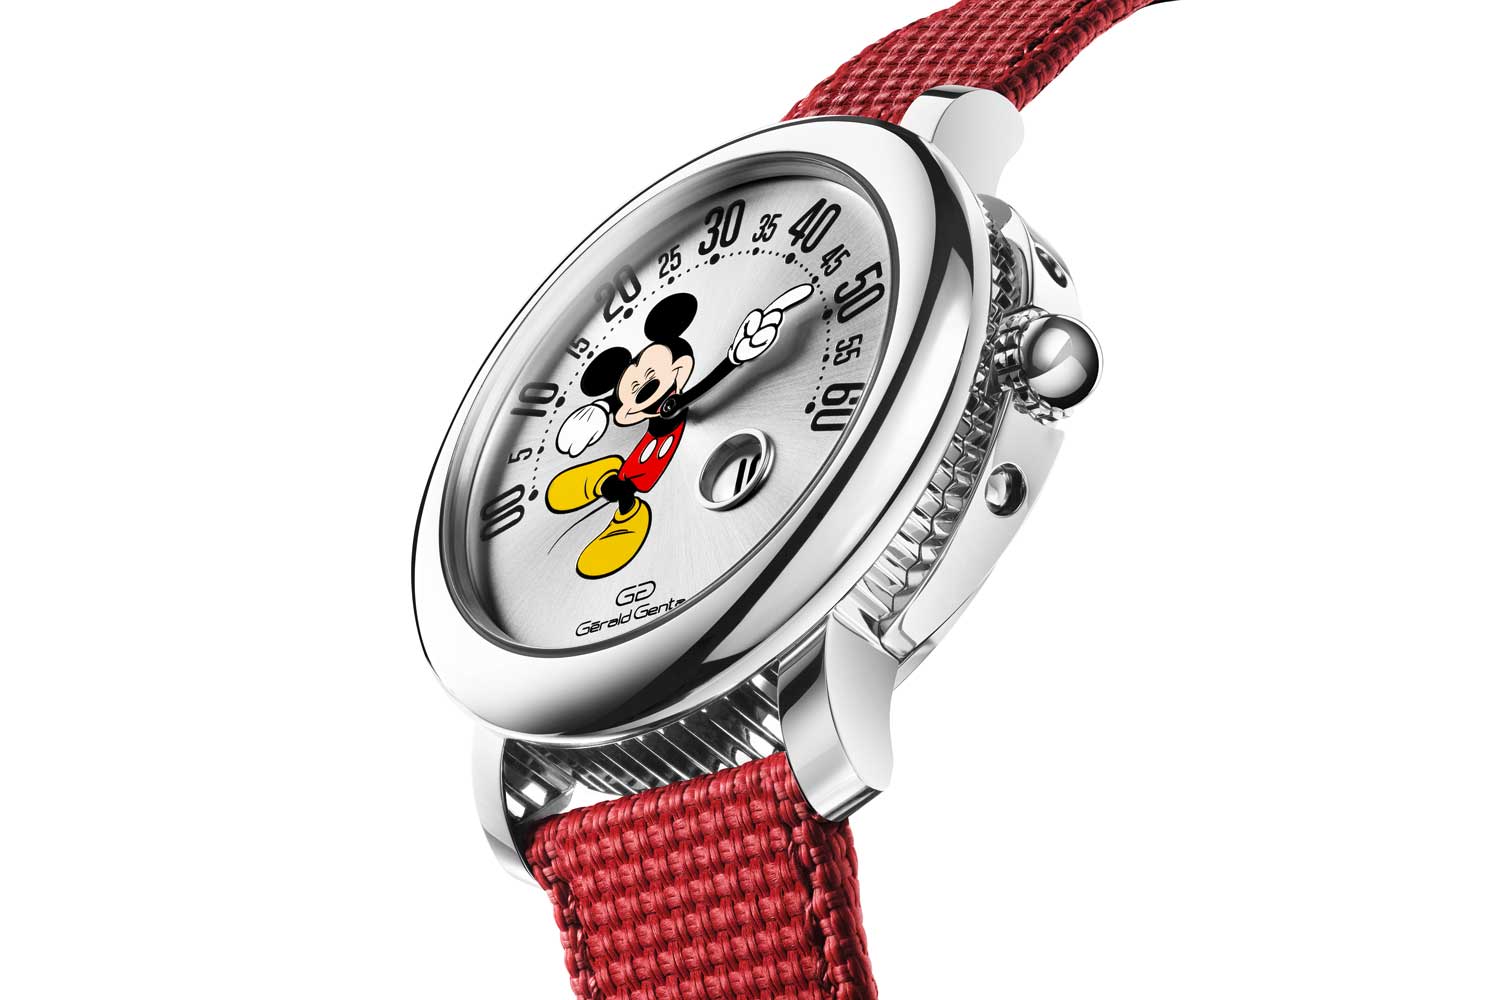 The Gerald Genta Arena Retro Mickey Mouse Disney will be produced in a limited run of just 150 pieces.